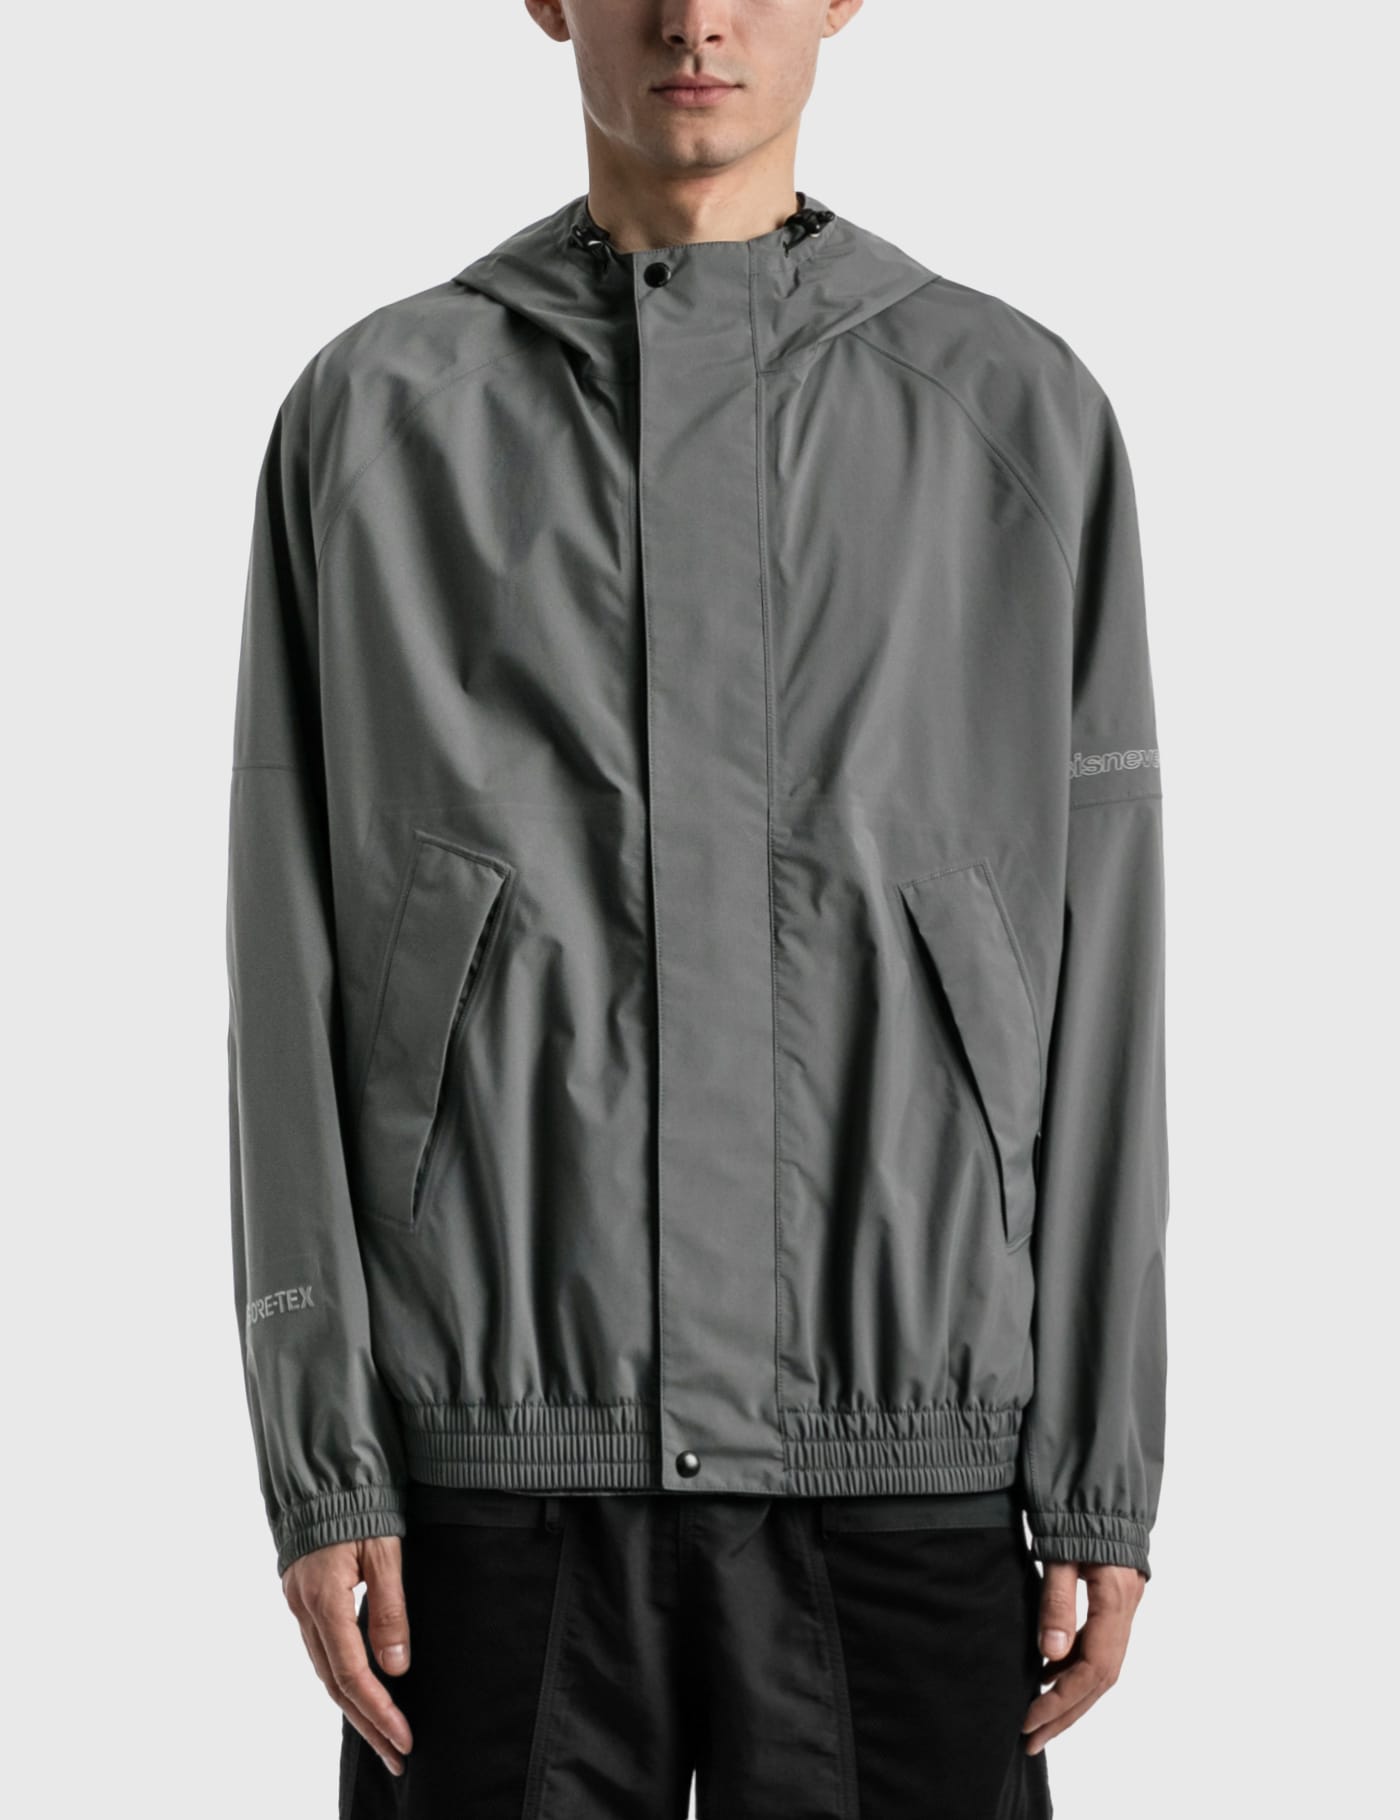 Thisisneverthat - GORE-TEX Paclite Jacket | HBX - Globally Curated 